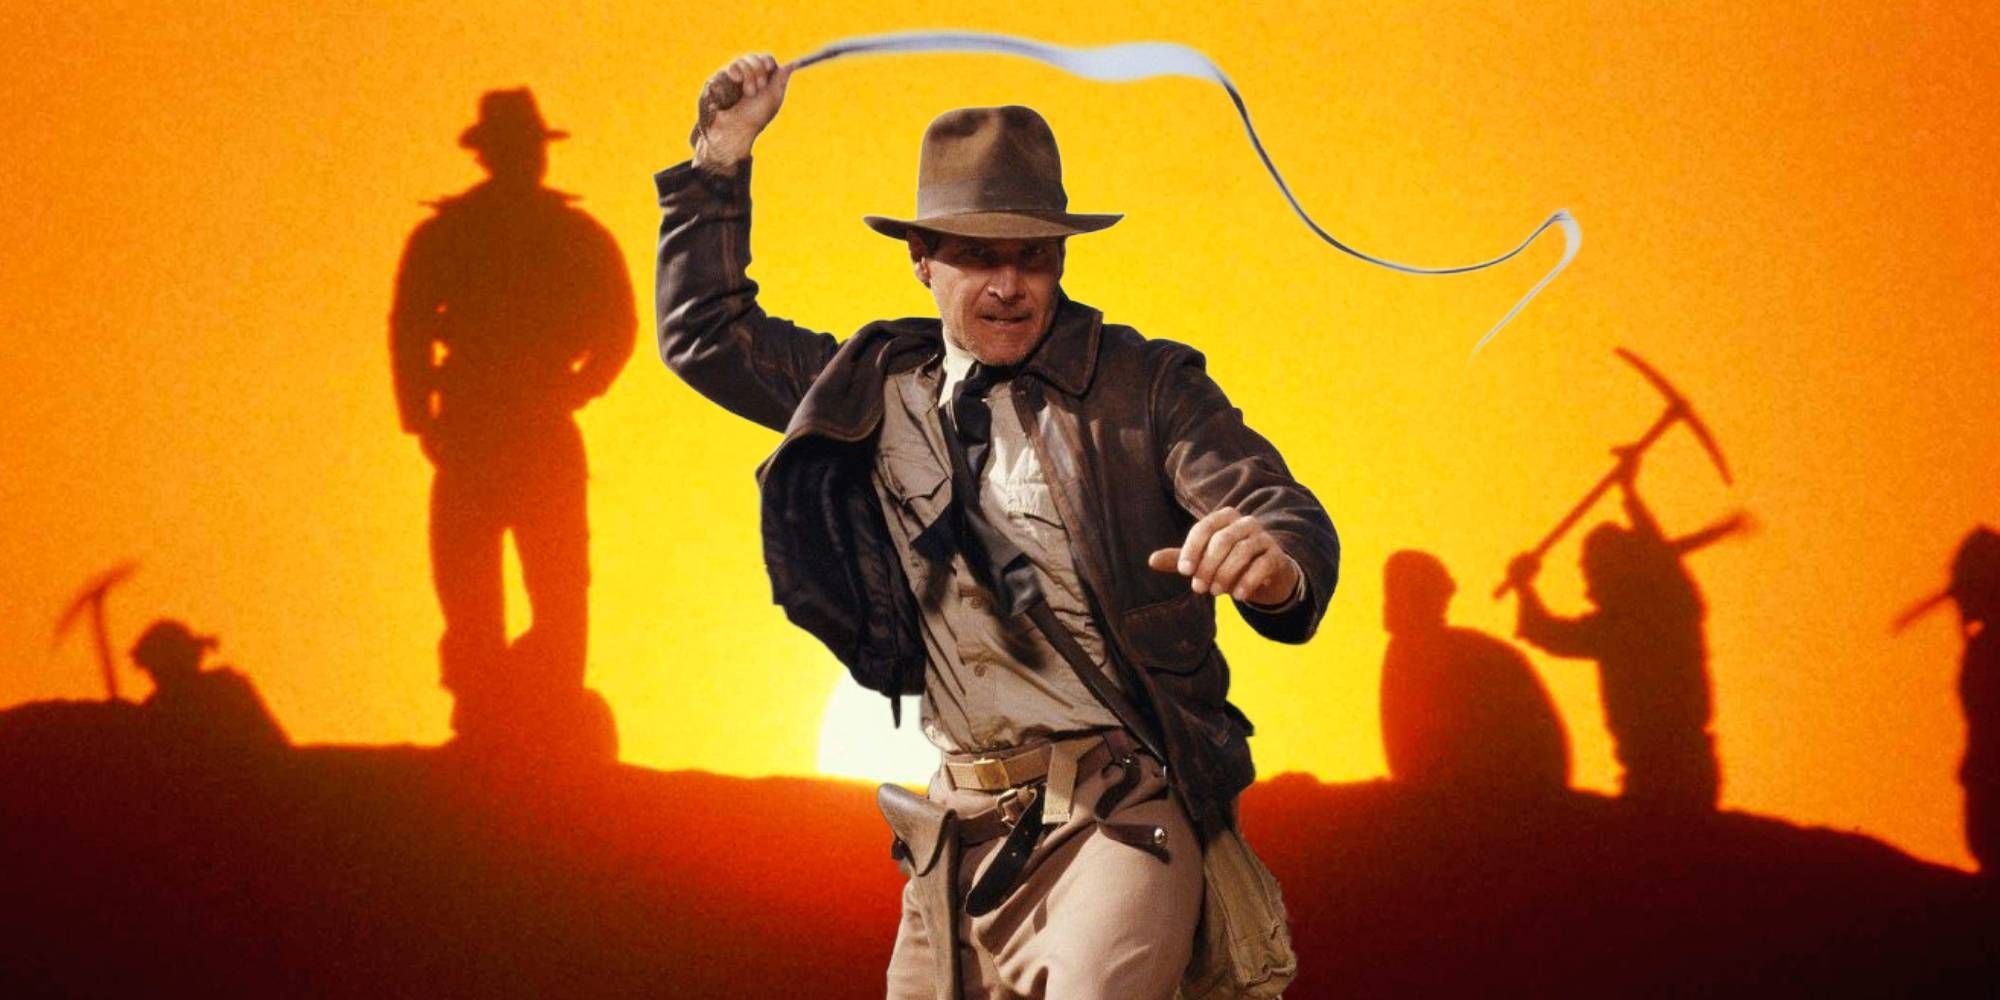 Indiana Jones raising his whip in front of iconic Raiders of the Lost Ark sunset silhouette scene